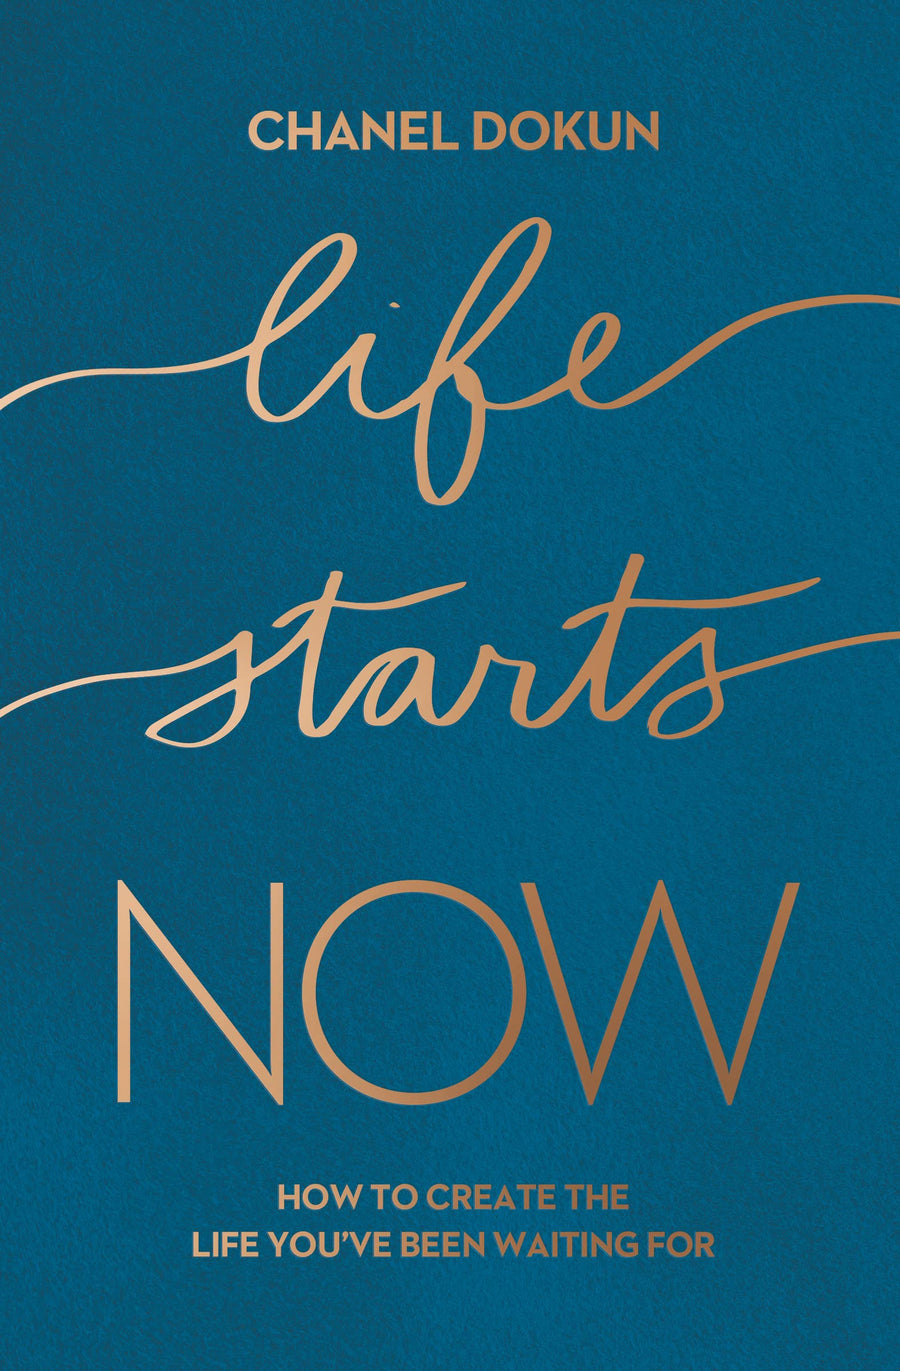 Life Starts Now: How to Create the Life You’ve Been Waiting For by Chanel Dokun